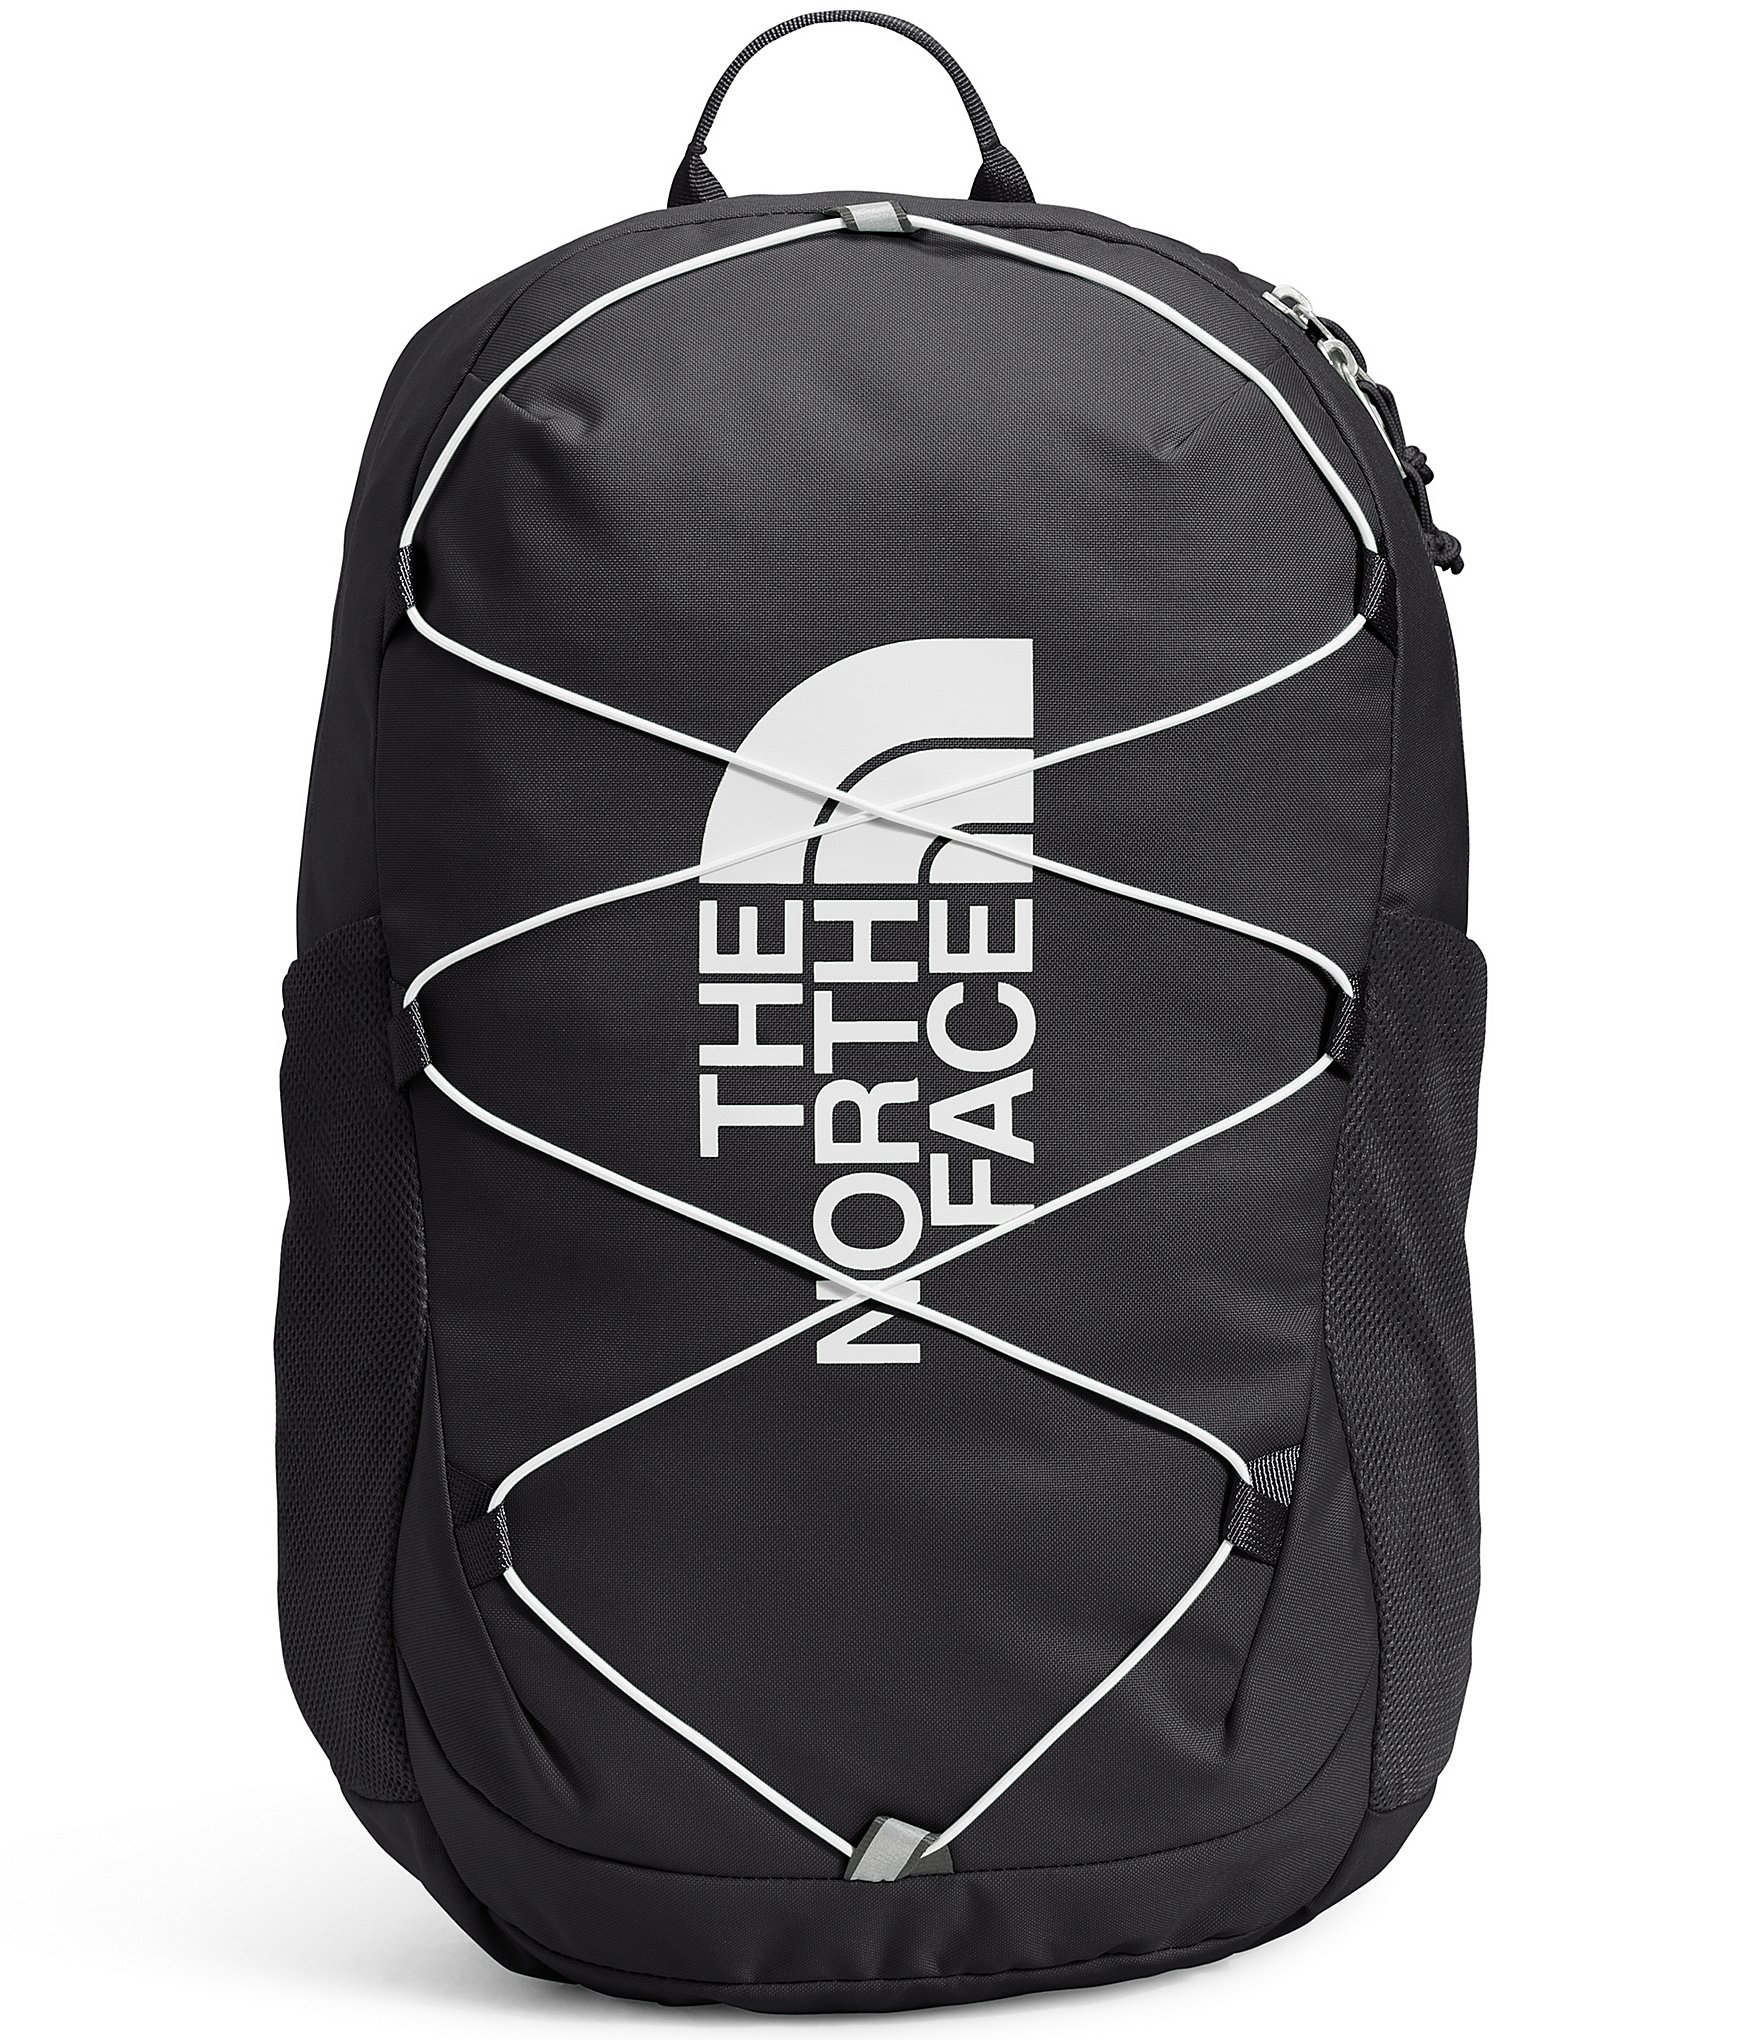 The North Face Black Jester Backpack